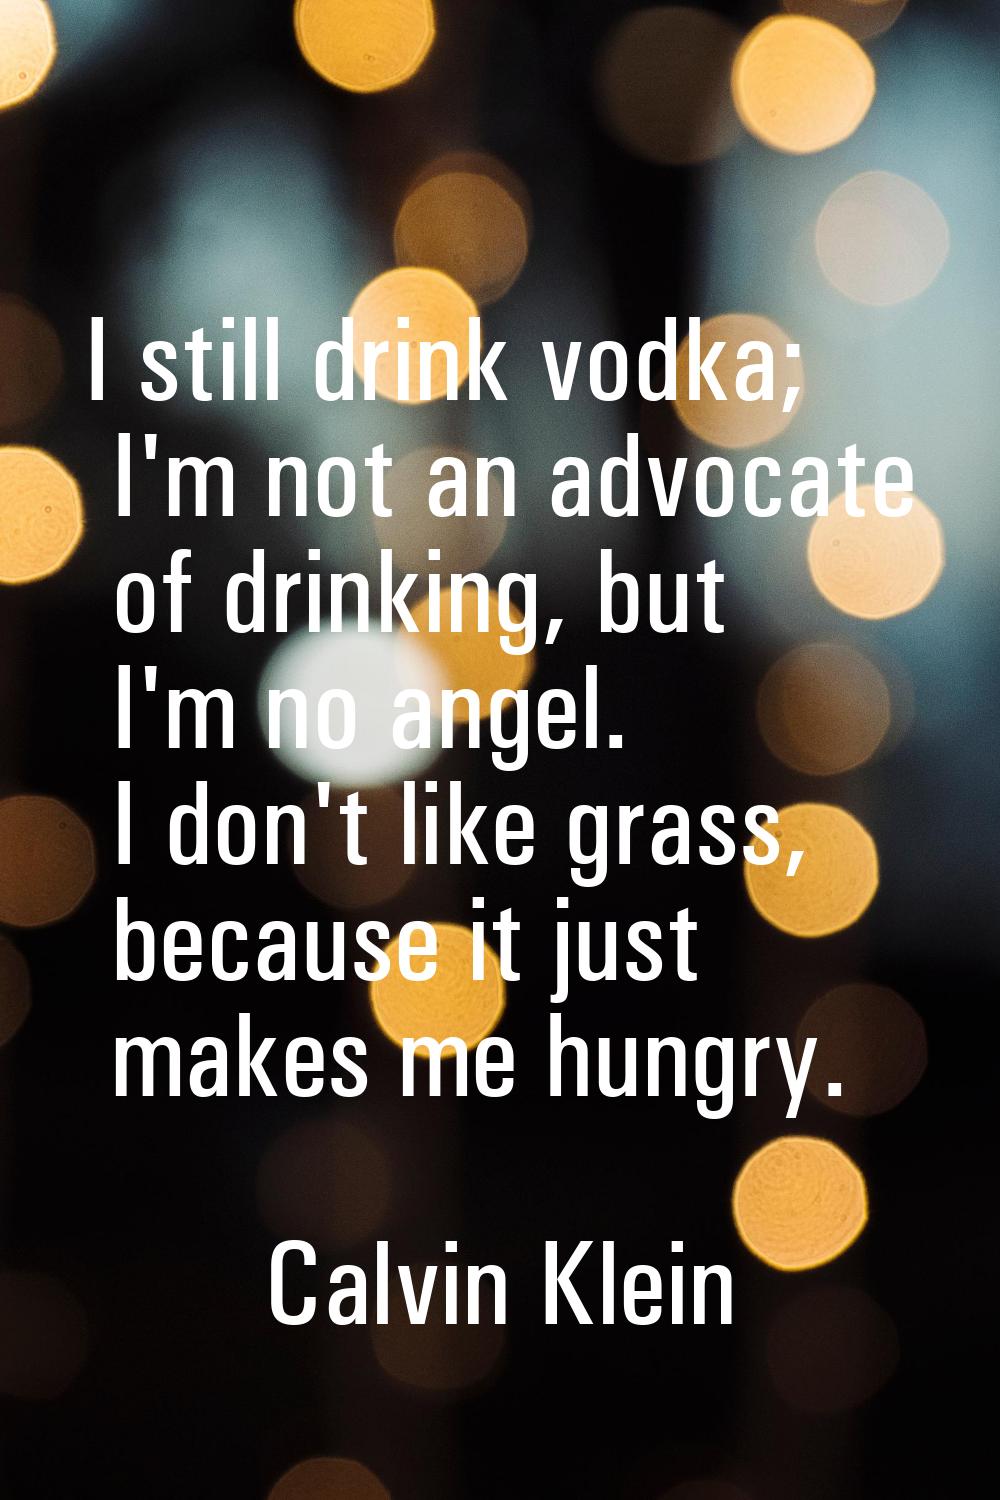 I still drink vodka; I'm not an advocate of drinking, but I'm no angel. I don't like grass, because